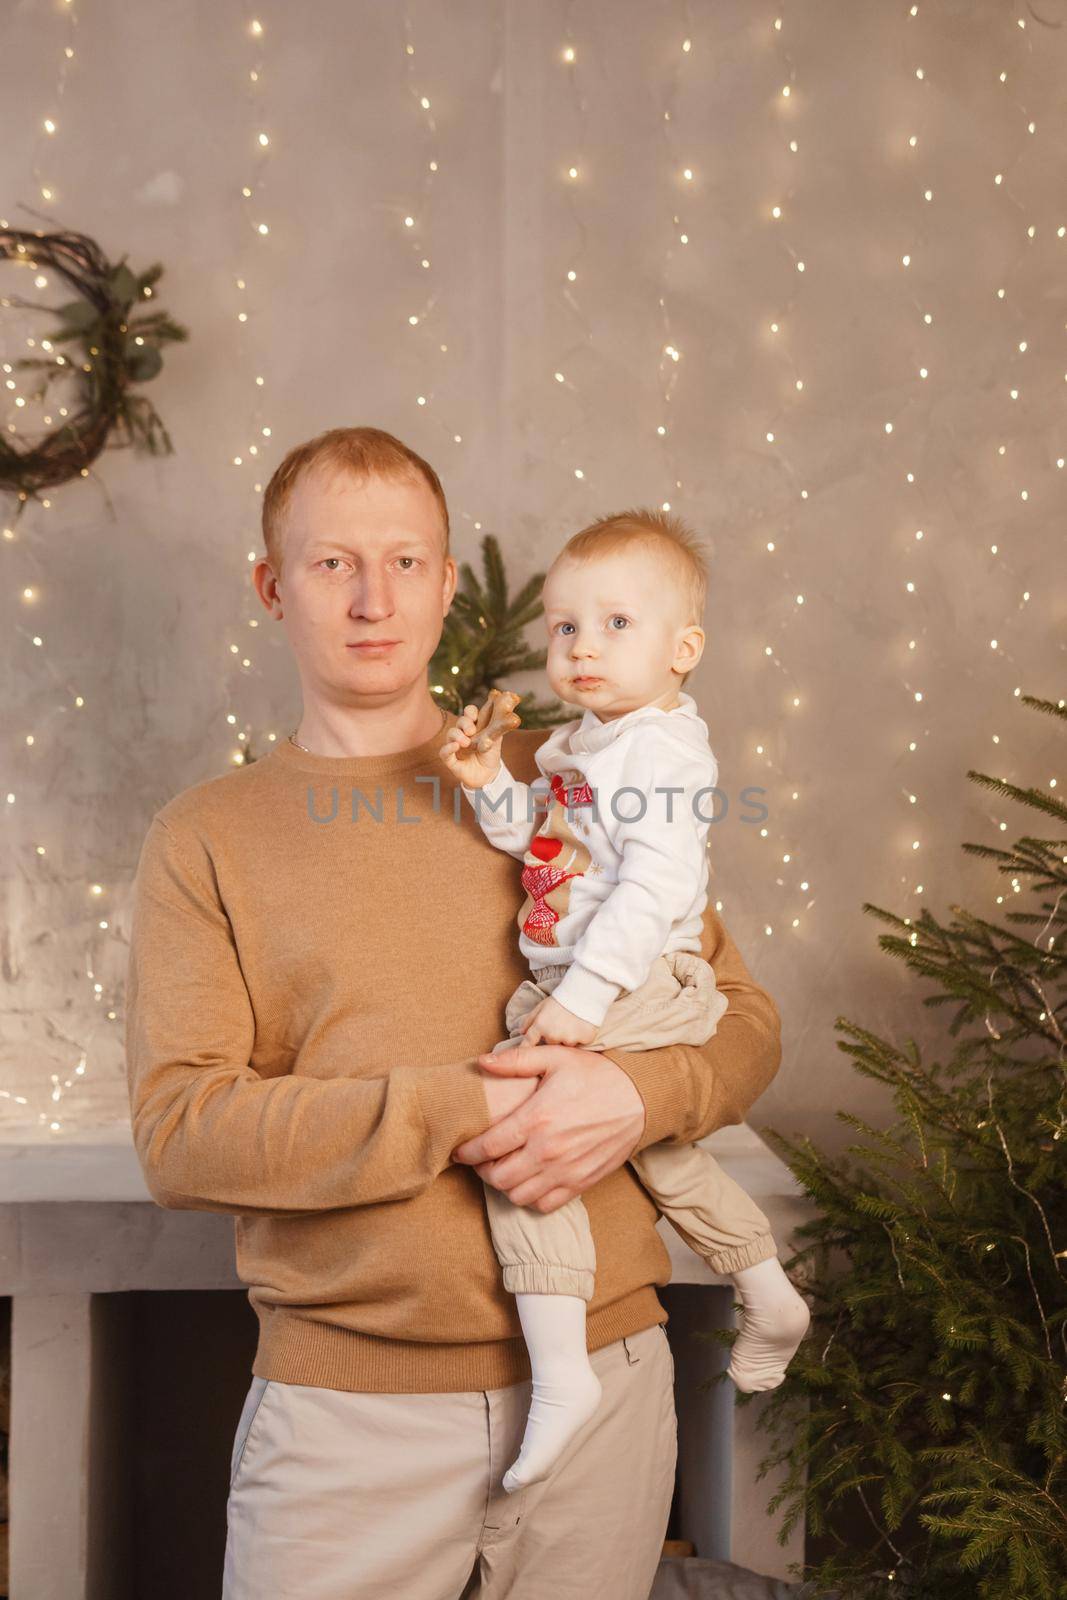 Dad and his little son in a magical Christmas atmosphere. The concept of family relations and New Year celebrations. by Annu1tochka